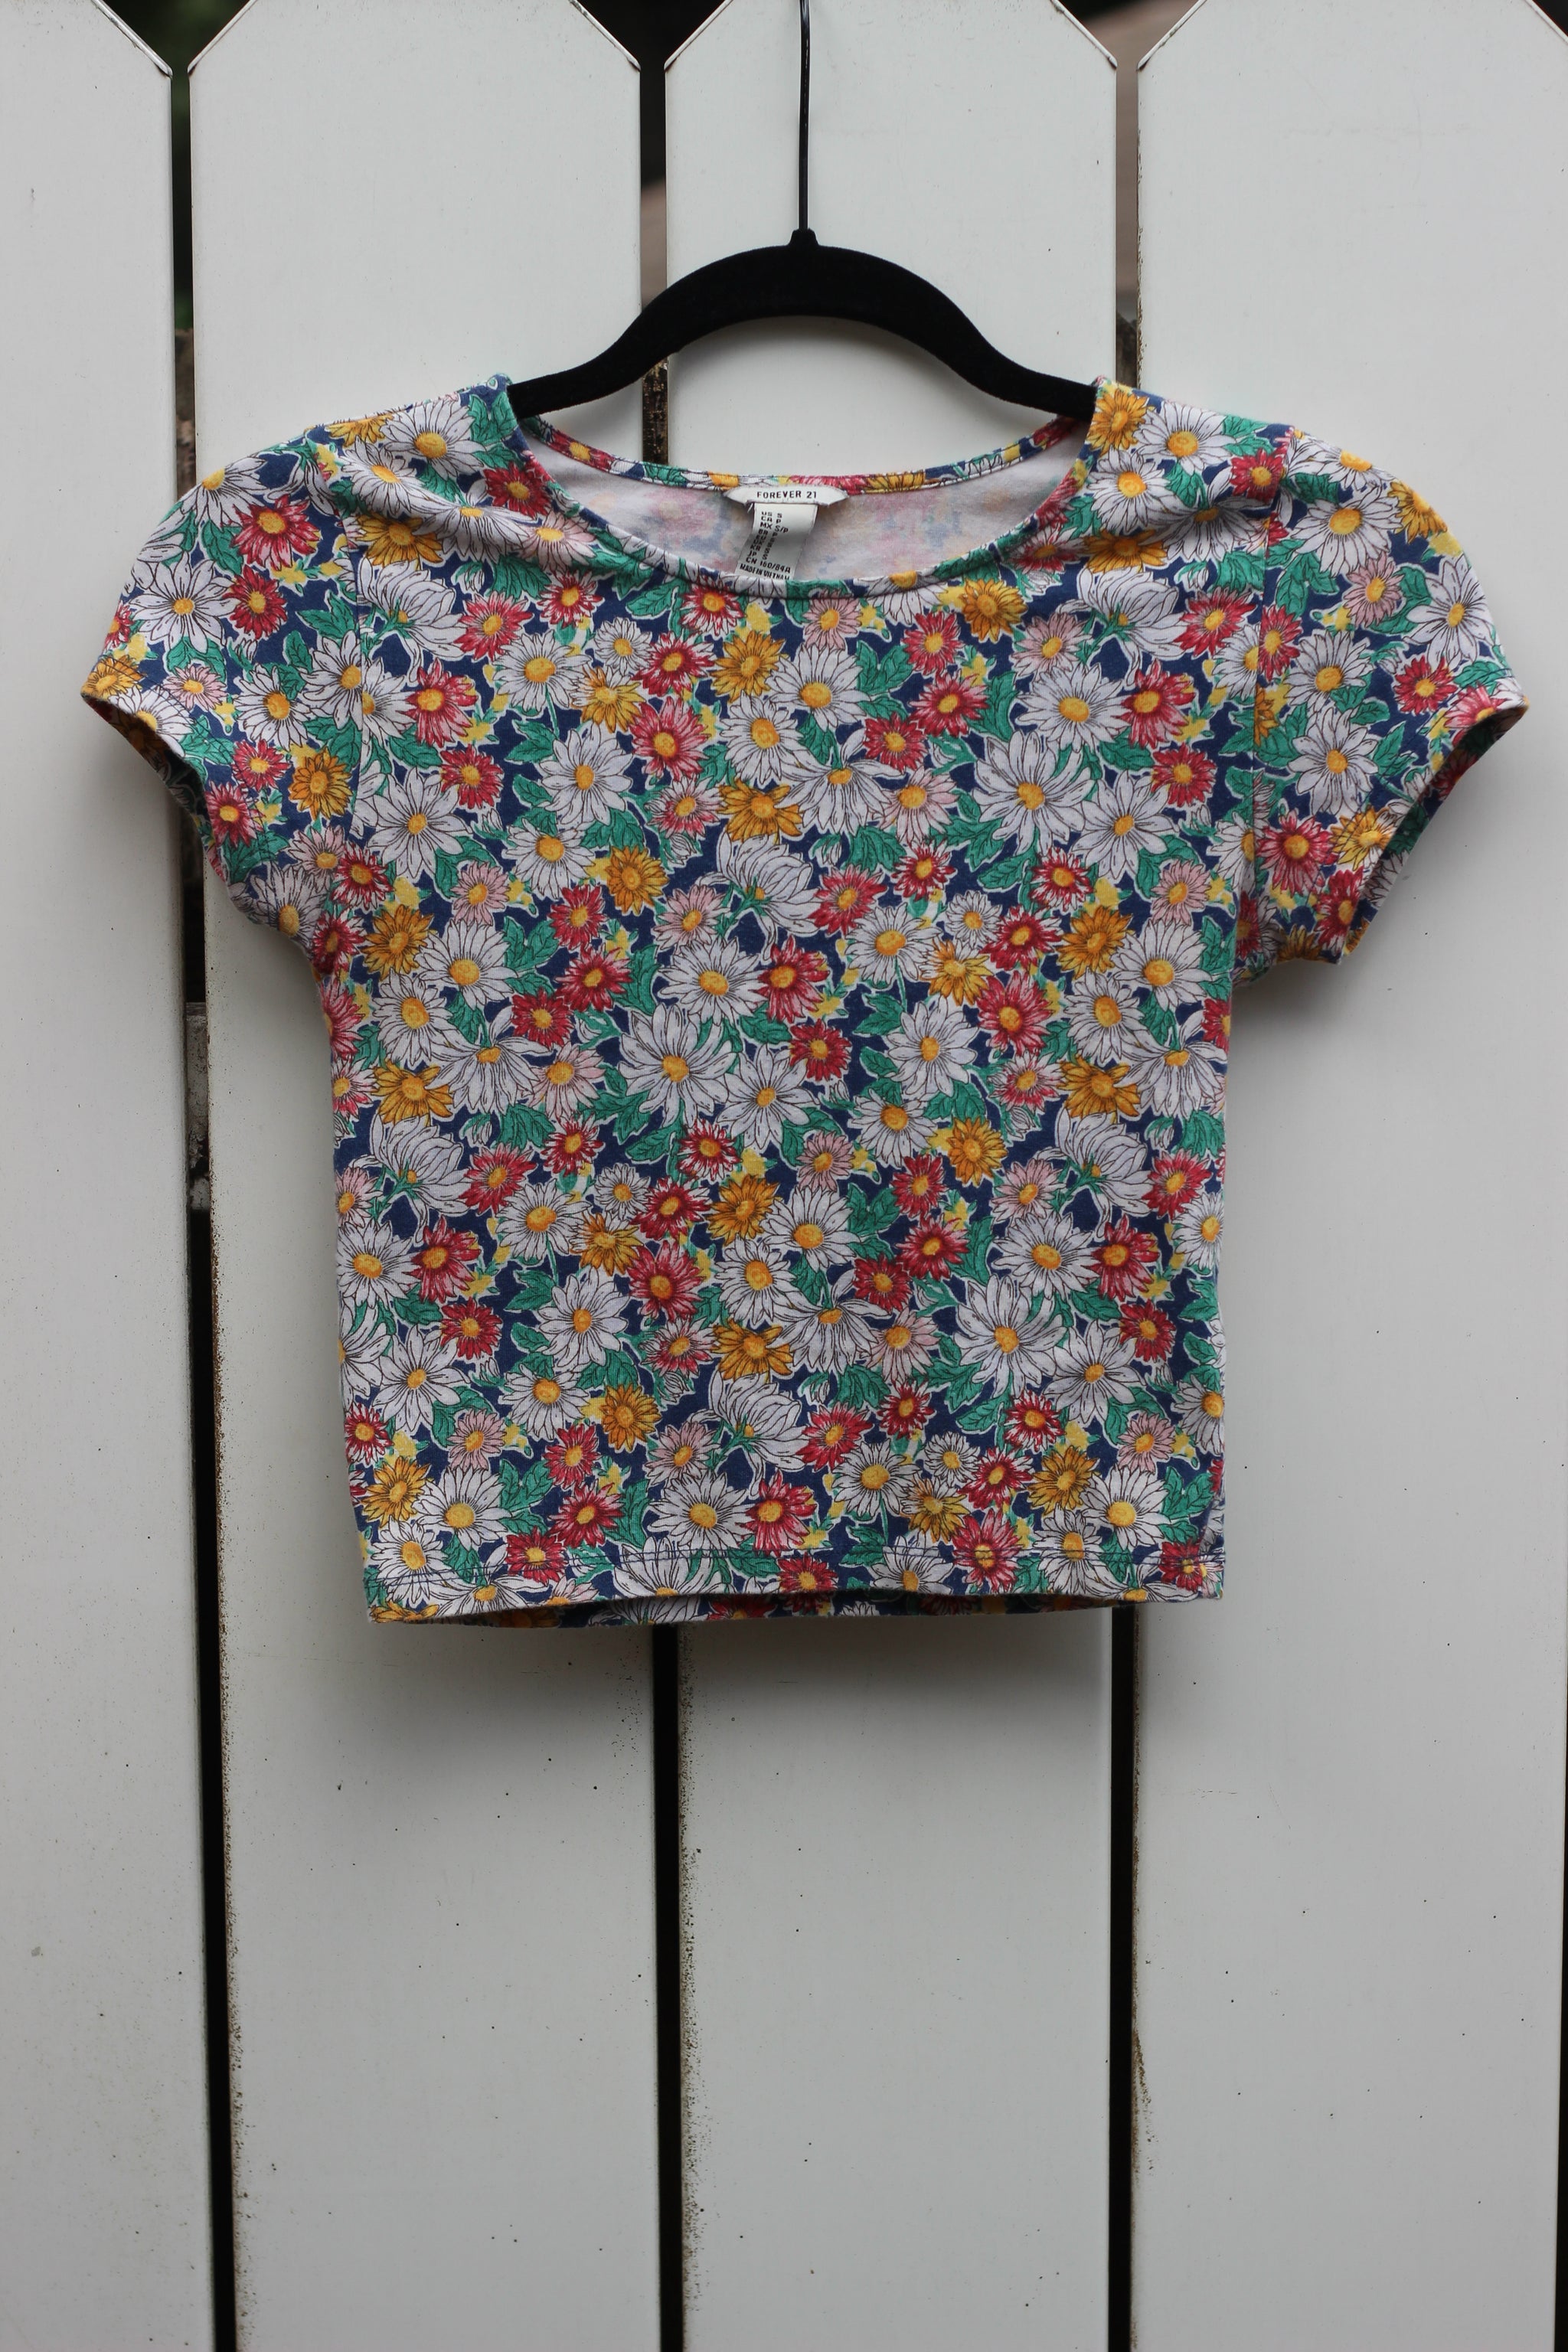 90's Style Floral Crop Top (XS/S)